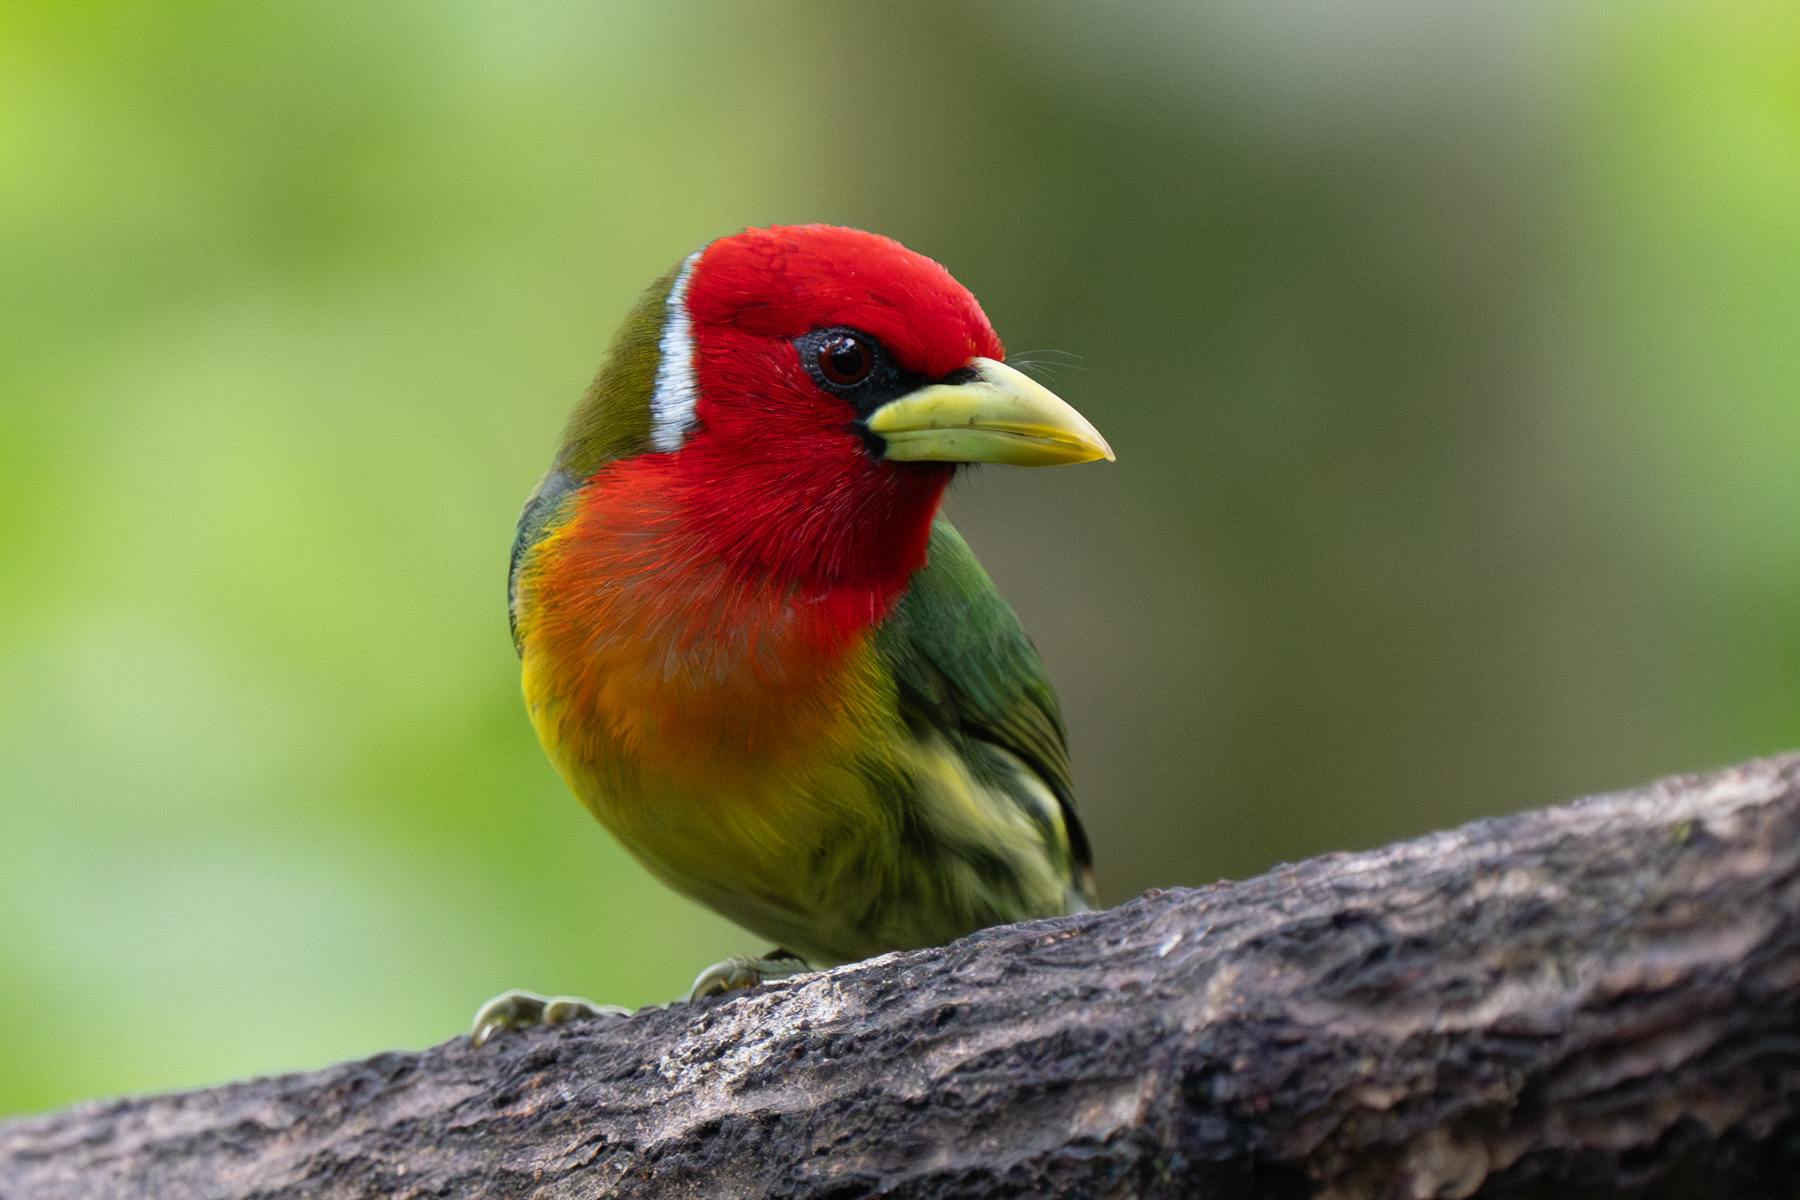 Red-headed Barbets are another avian jewel of Costa Rica's cloud forests (image by Inger Vandyke)